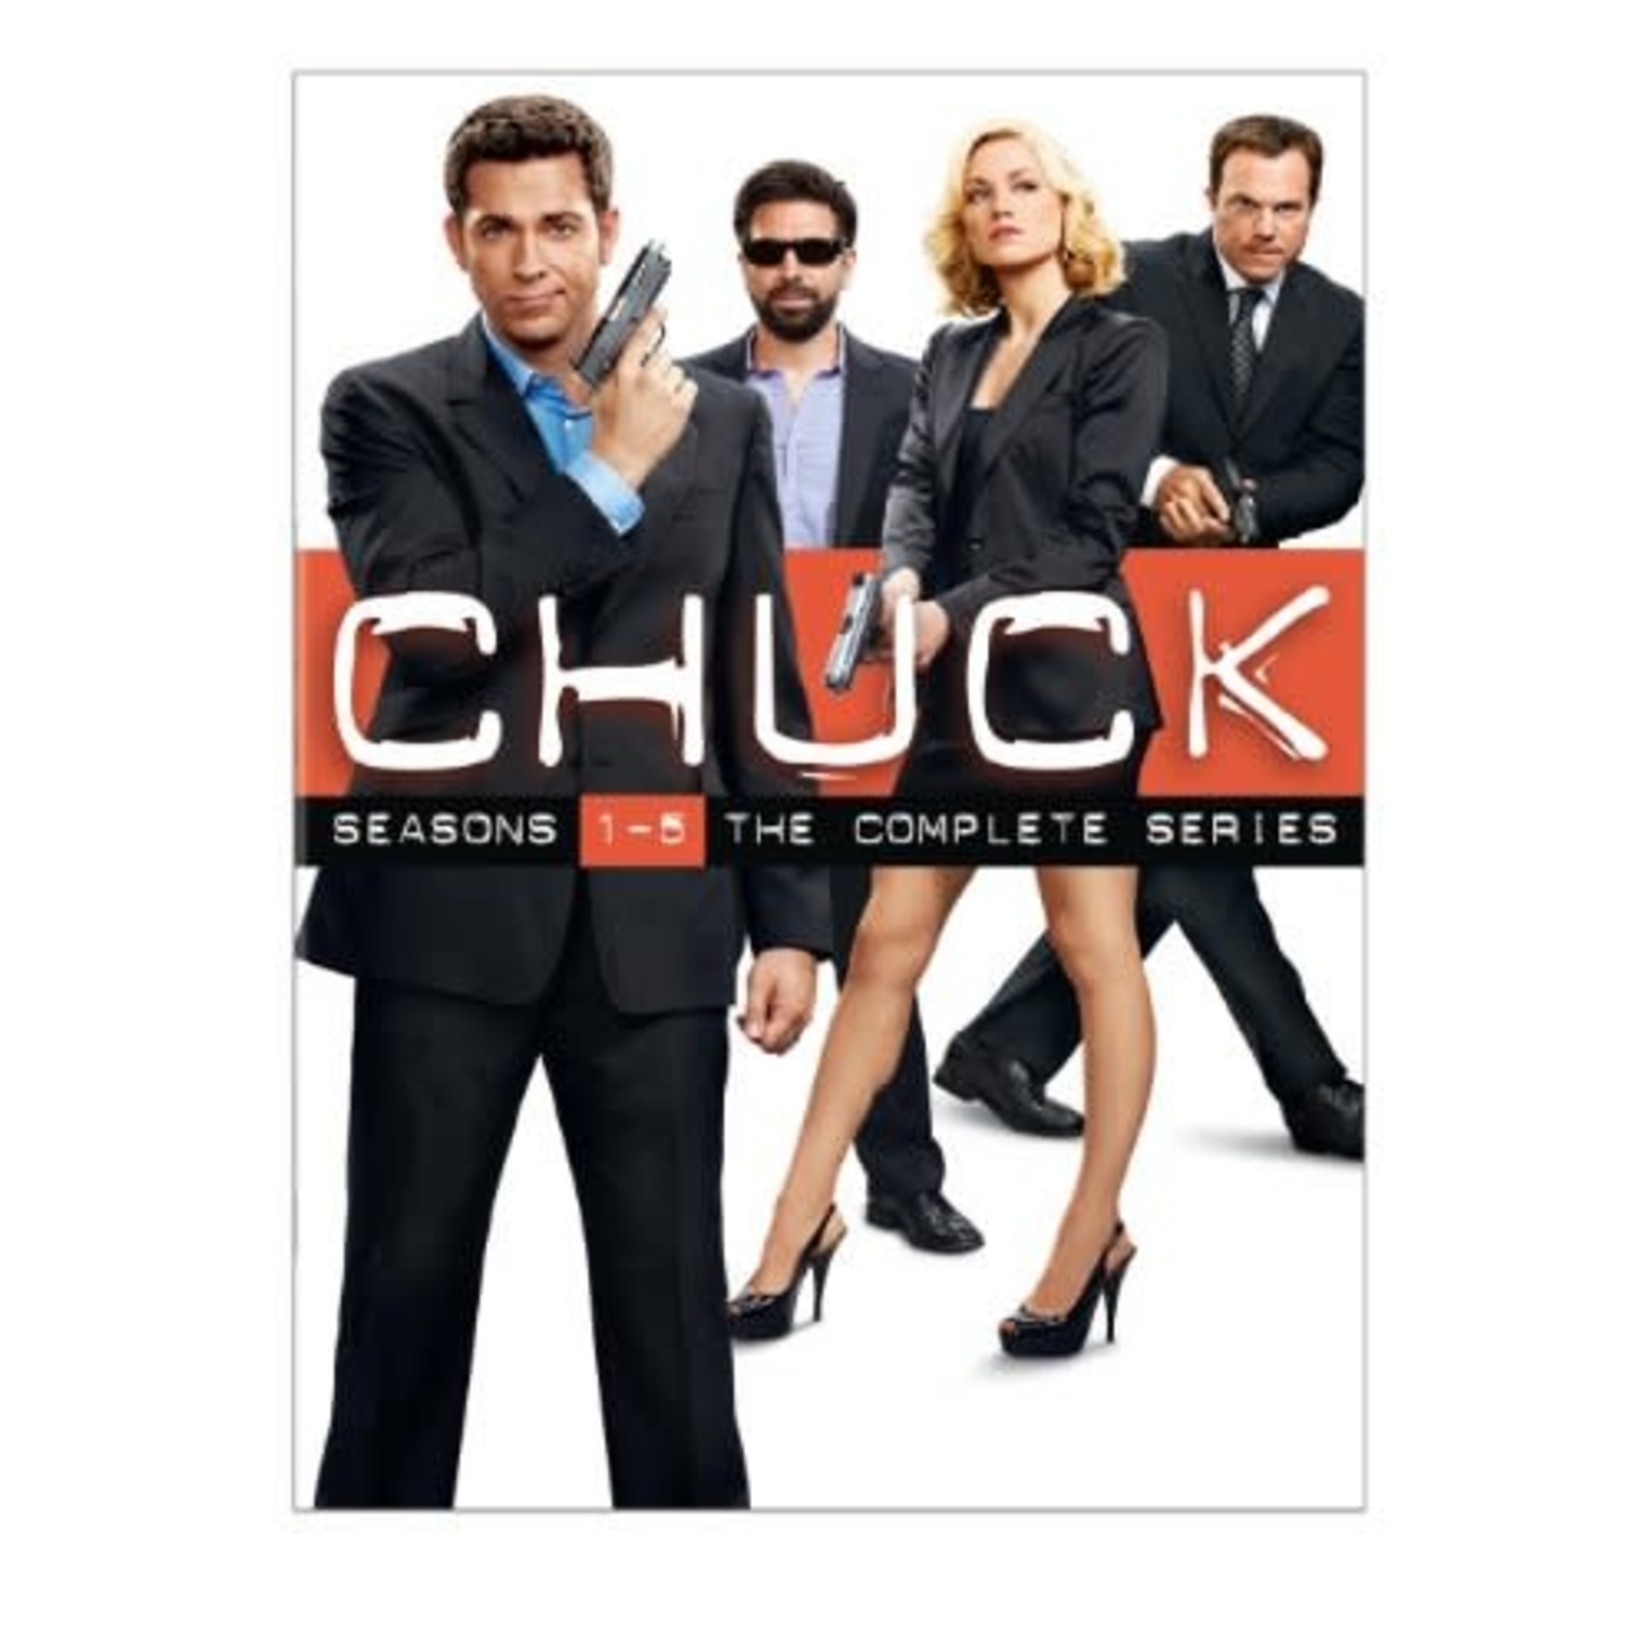 Chuck - The Complete Series [USED DVD]